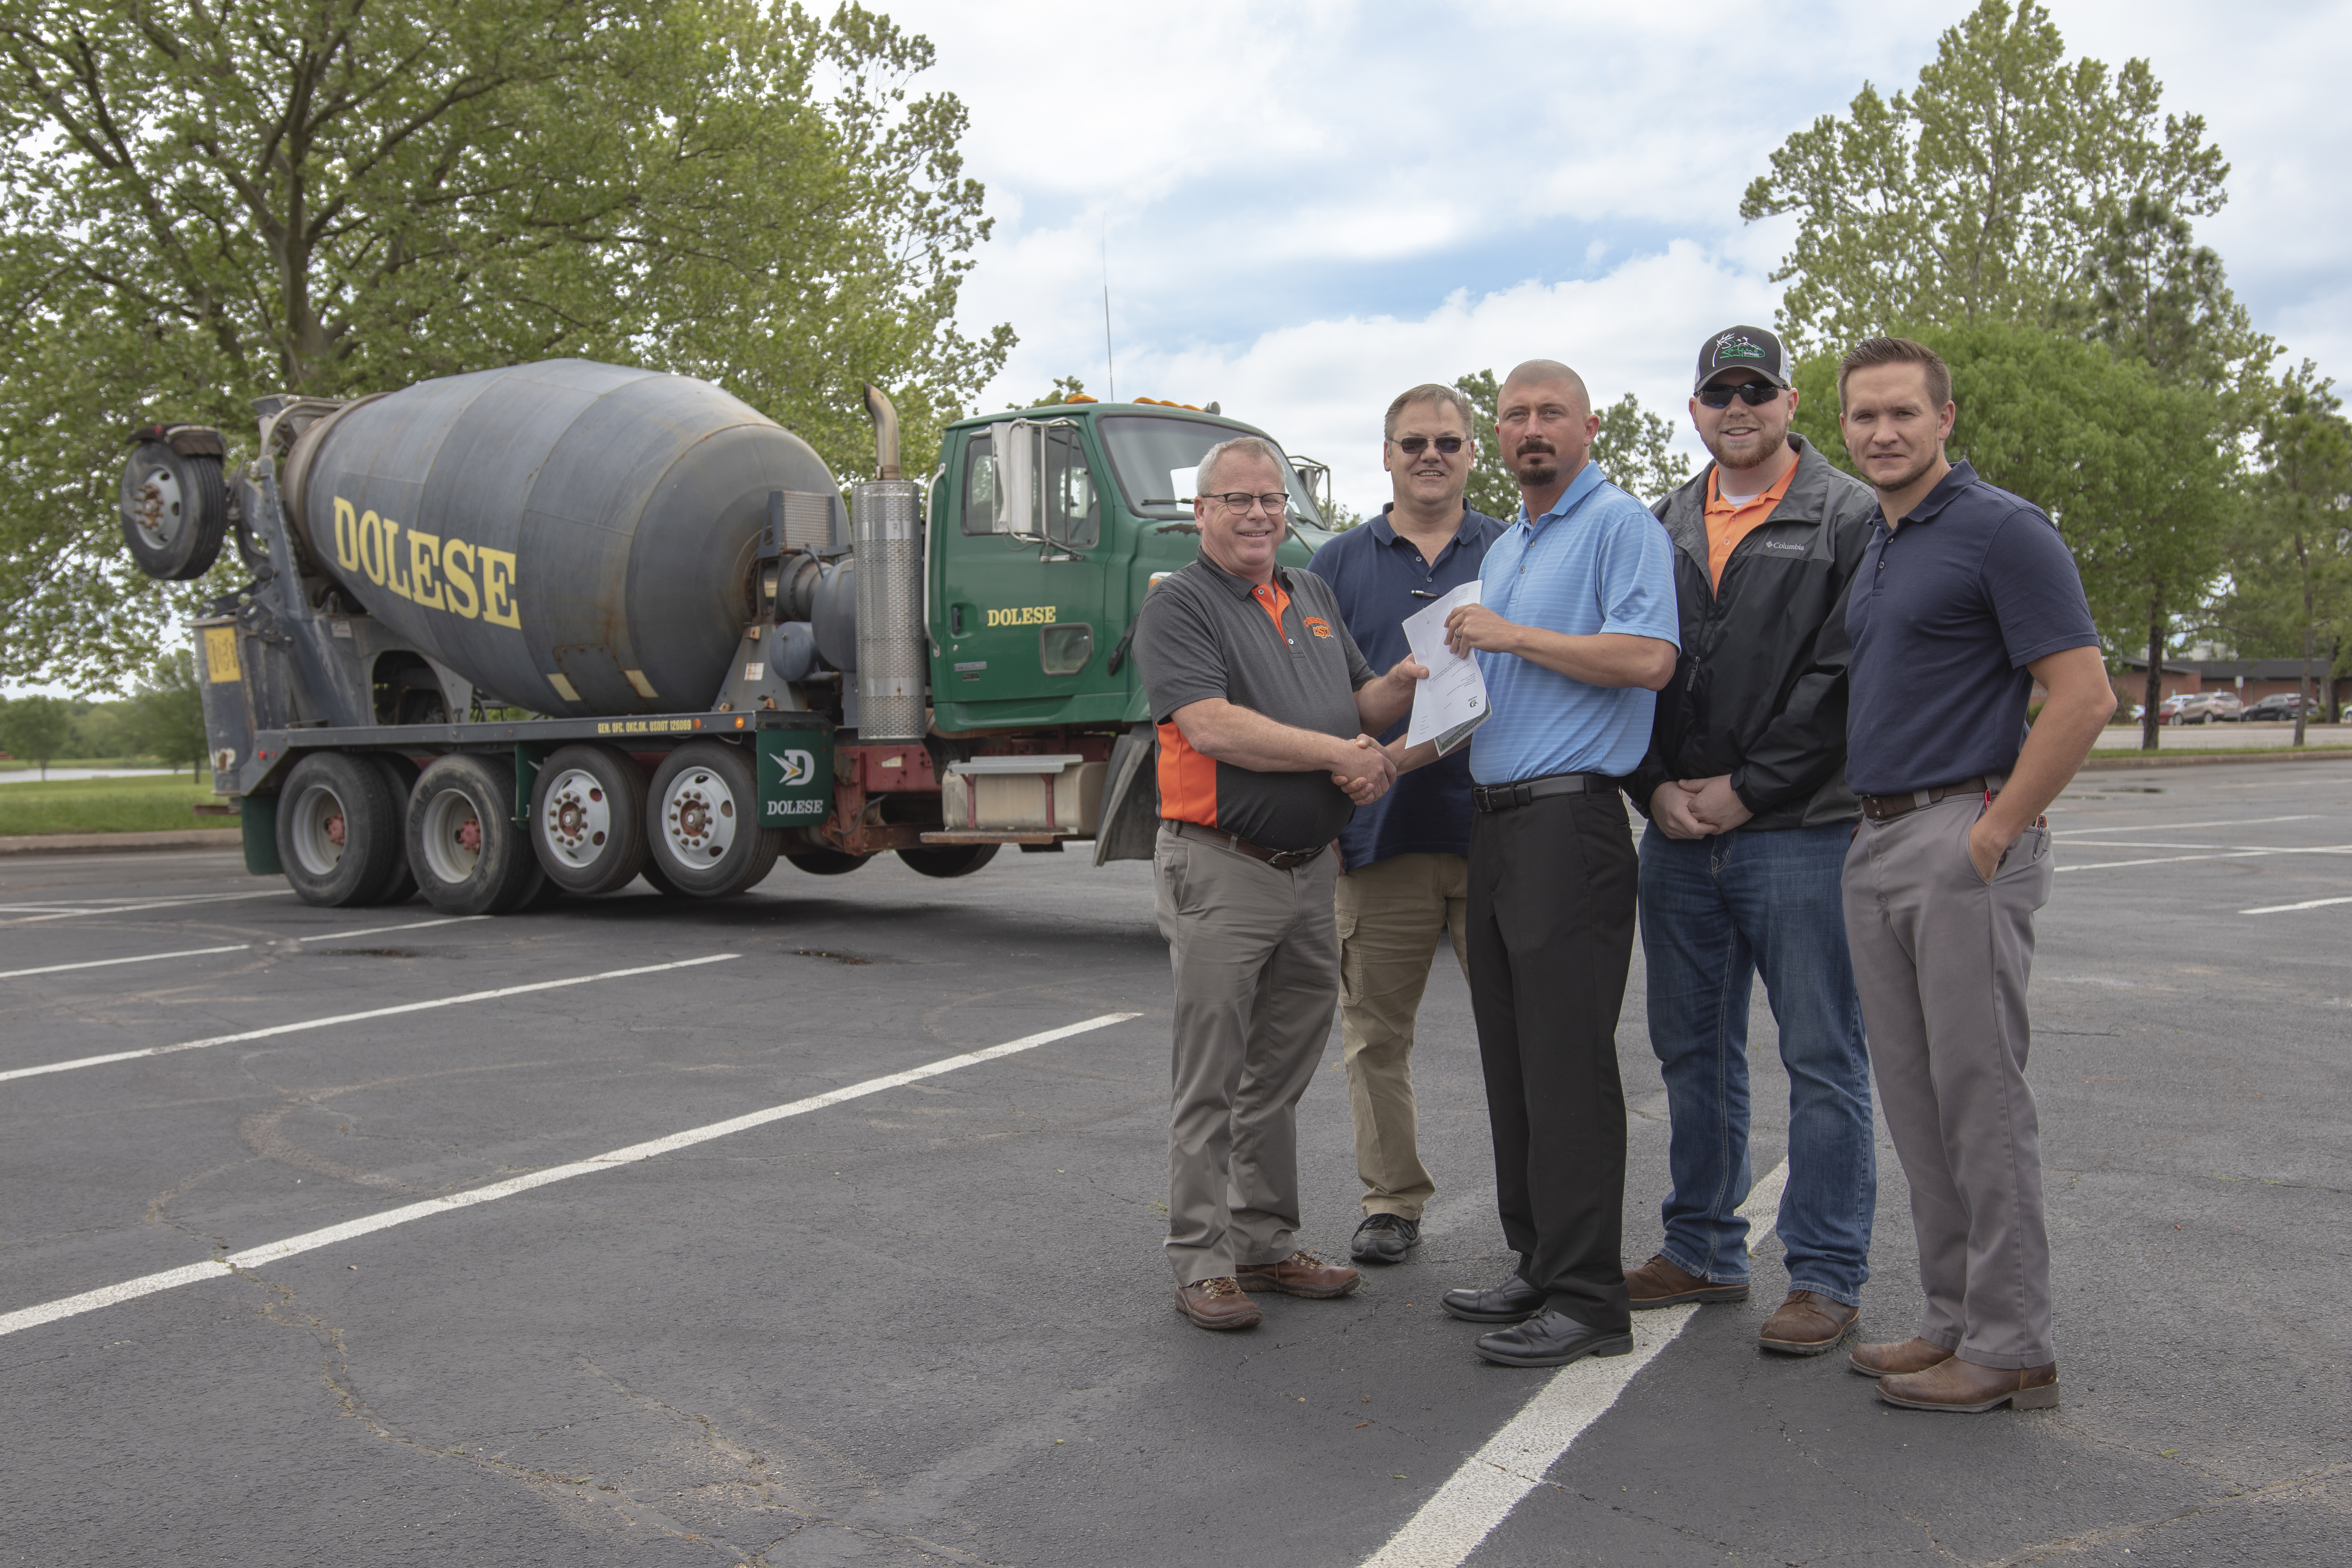 New Partnership with Dolese for Truck Technician Program Thursday, May 23, 2019